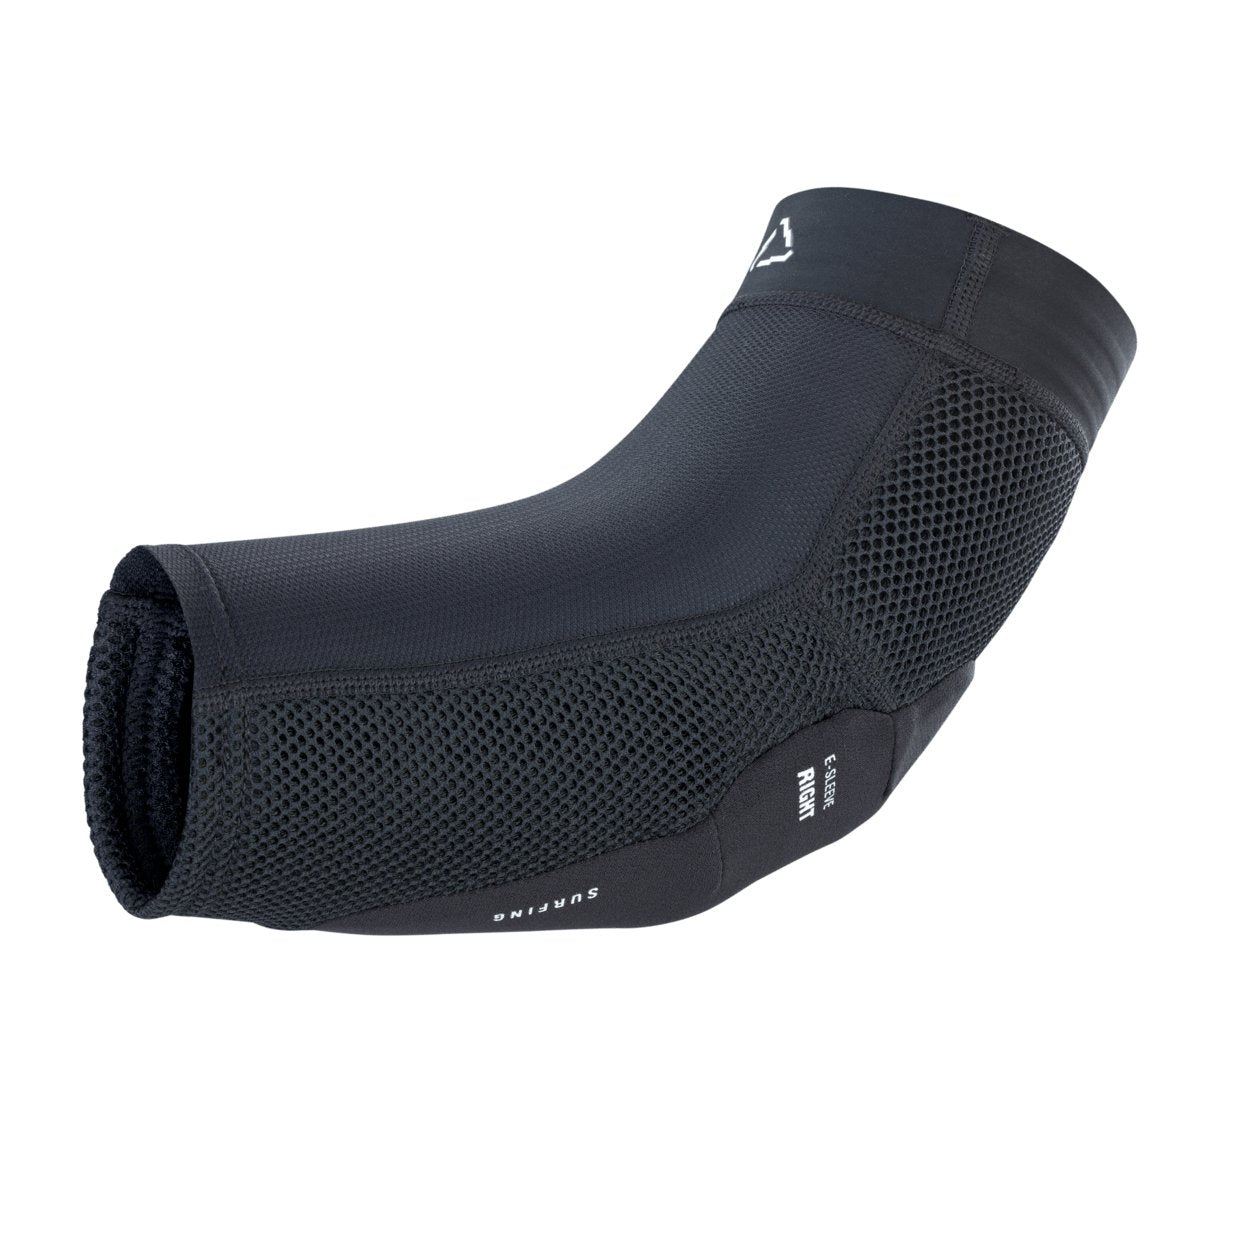 ION MTB Elbow Pads E-Sleeve 2024 - Worthing Watersports - 9010583028651 - Body Armor - ION Bike